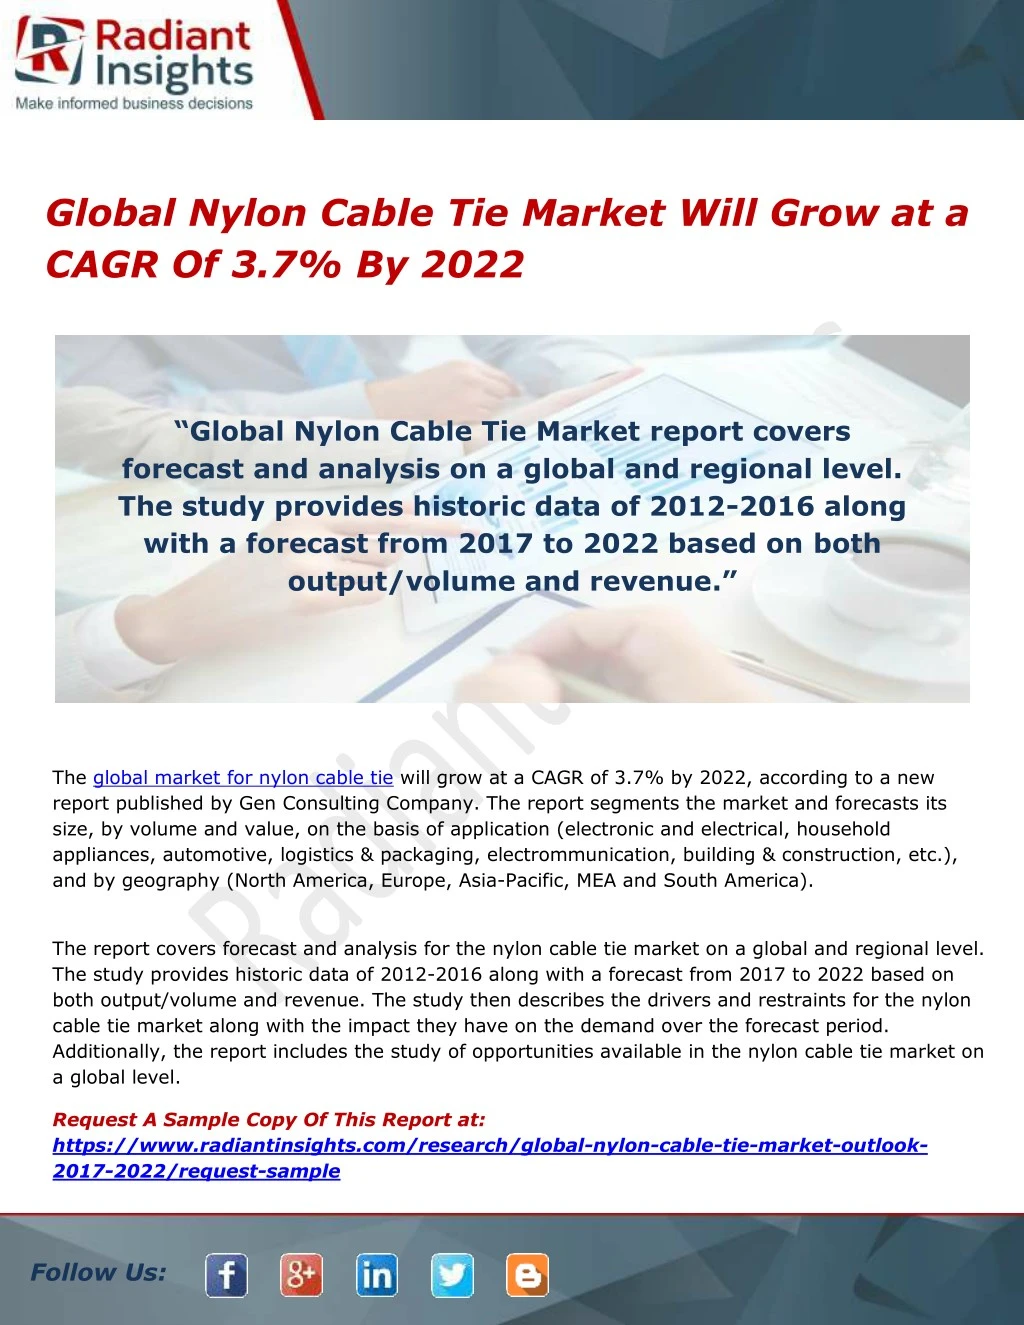 global nylon cable tie market will grow at a cagr